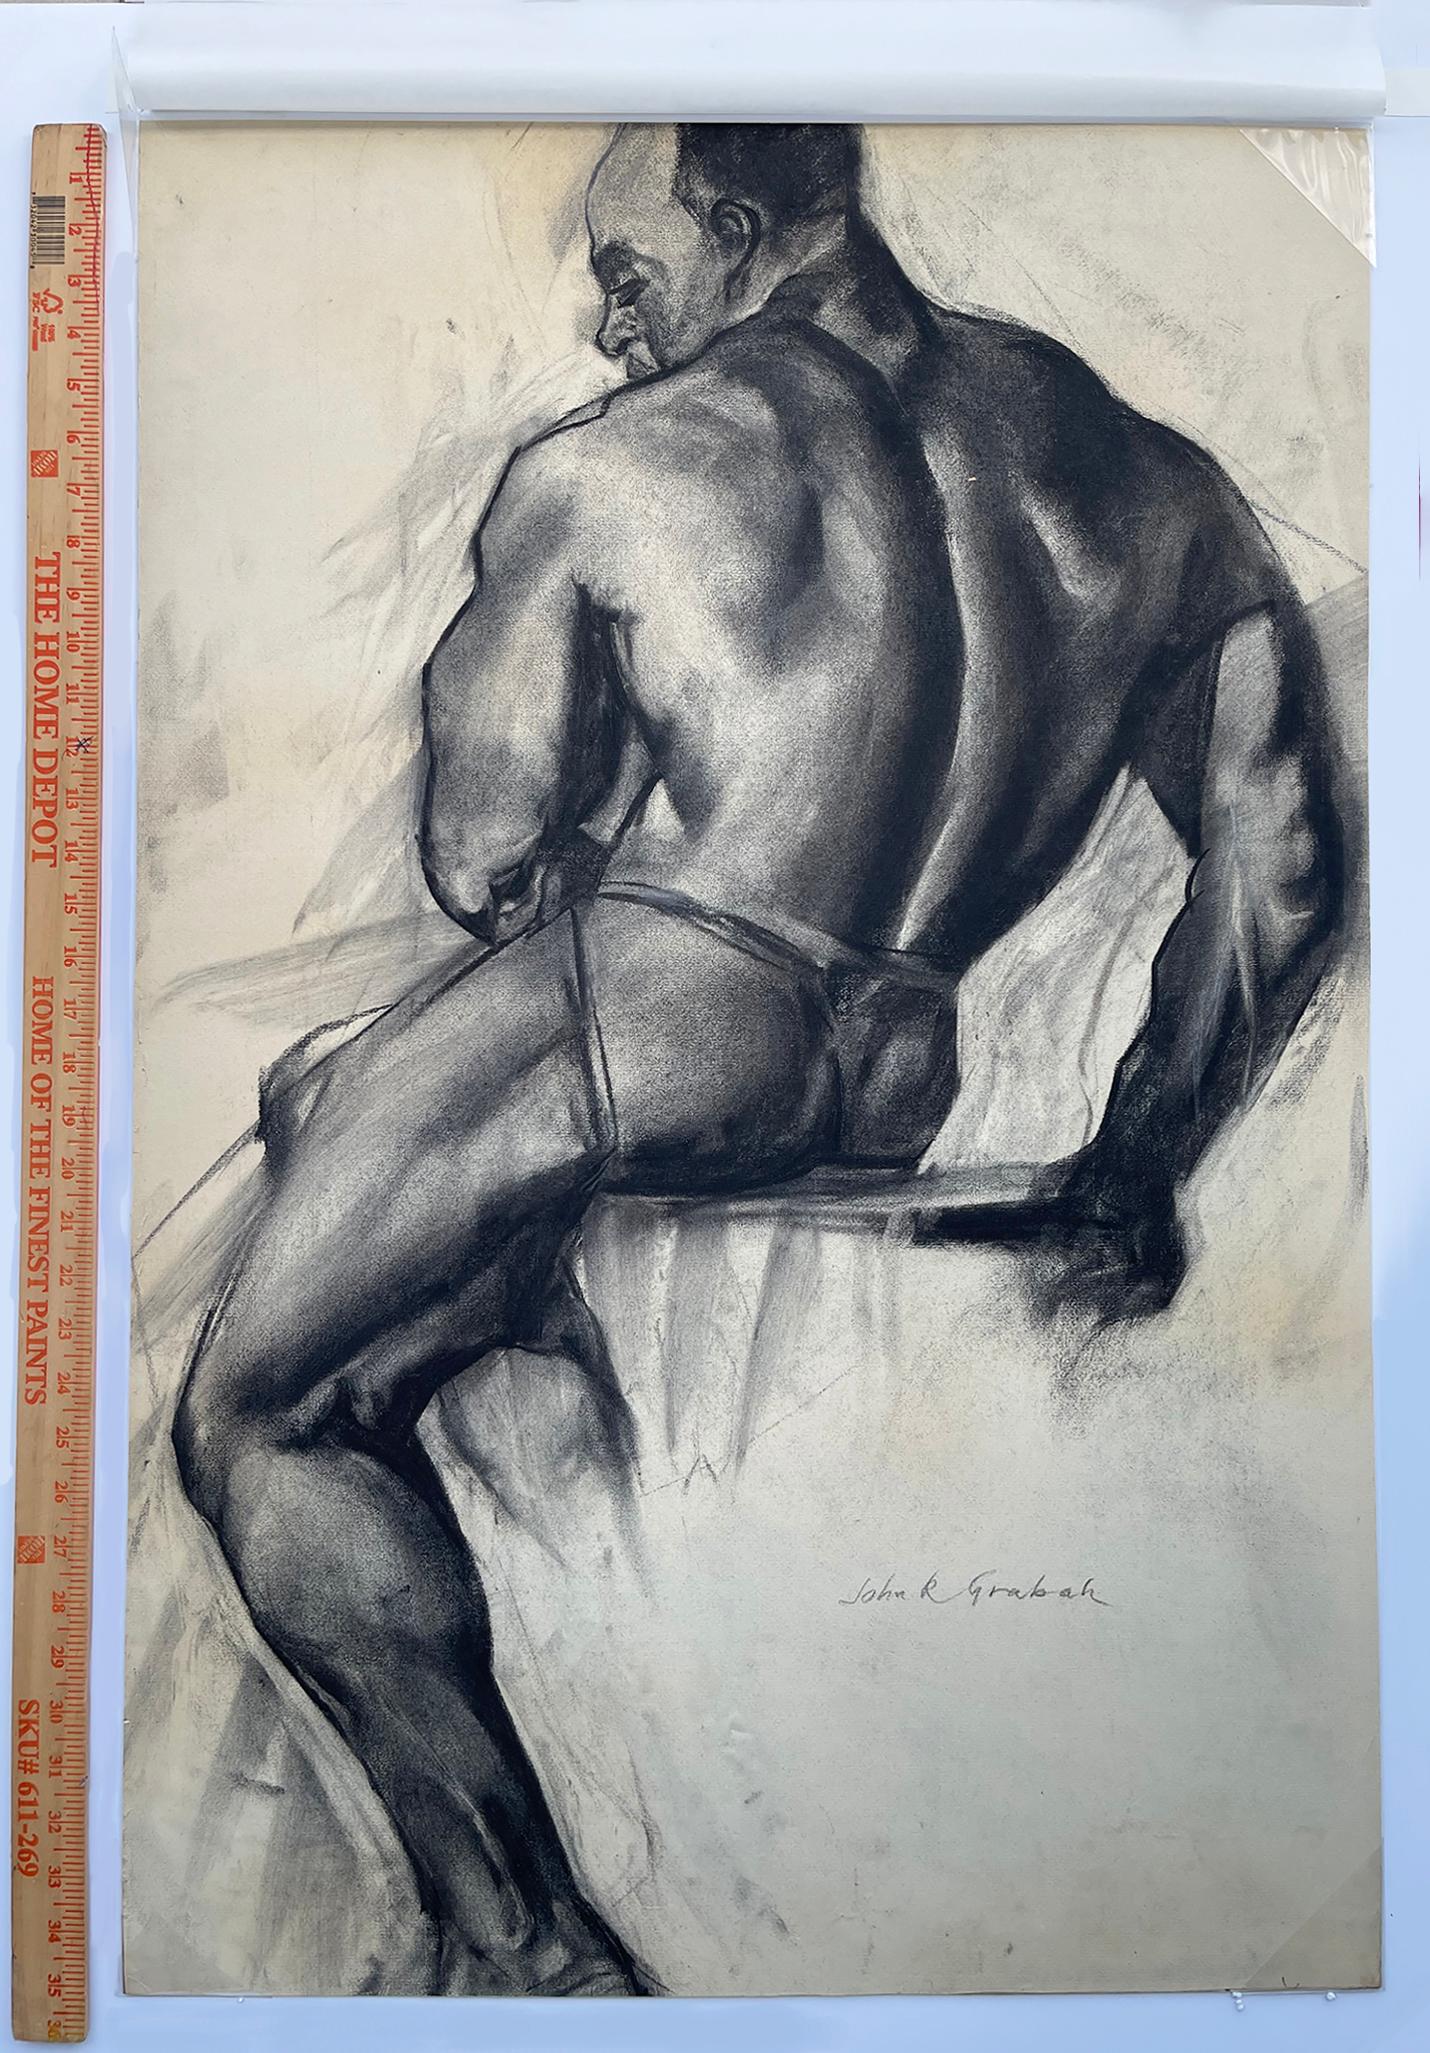 Black Male Nude Sitting,   Academic Charcoal Nude Figure Drawing Life Class  - Art by John R. Grabach